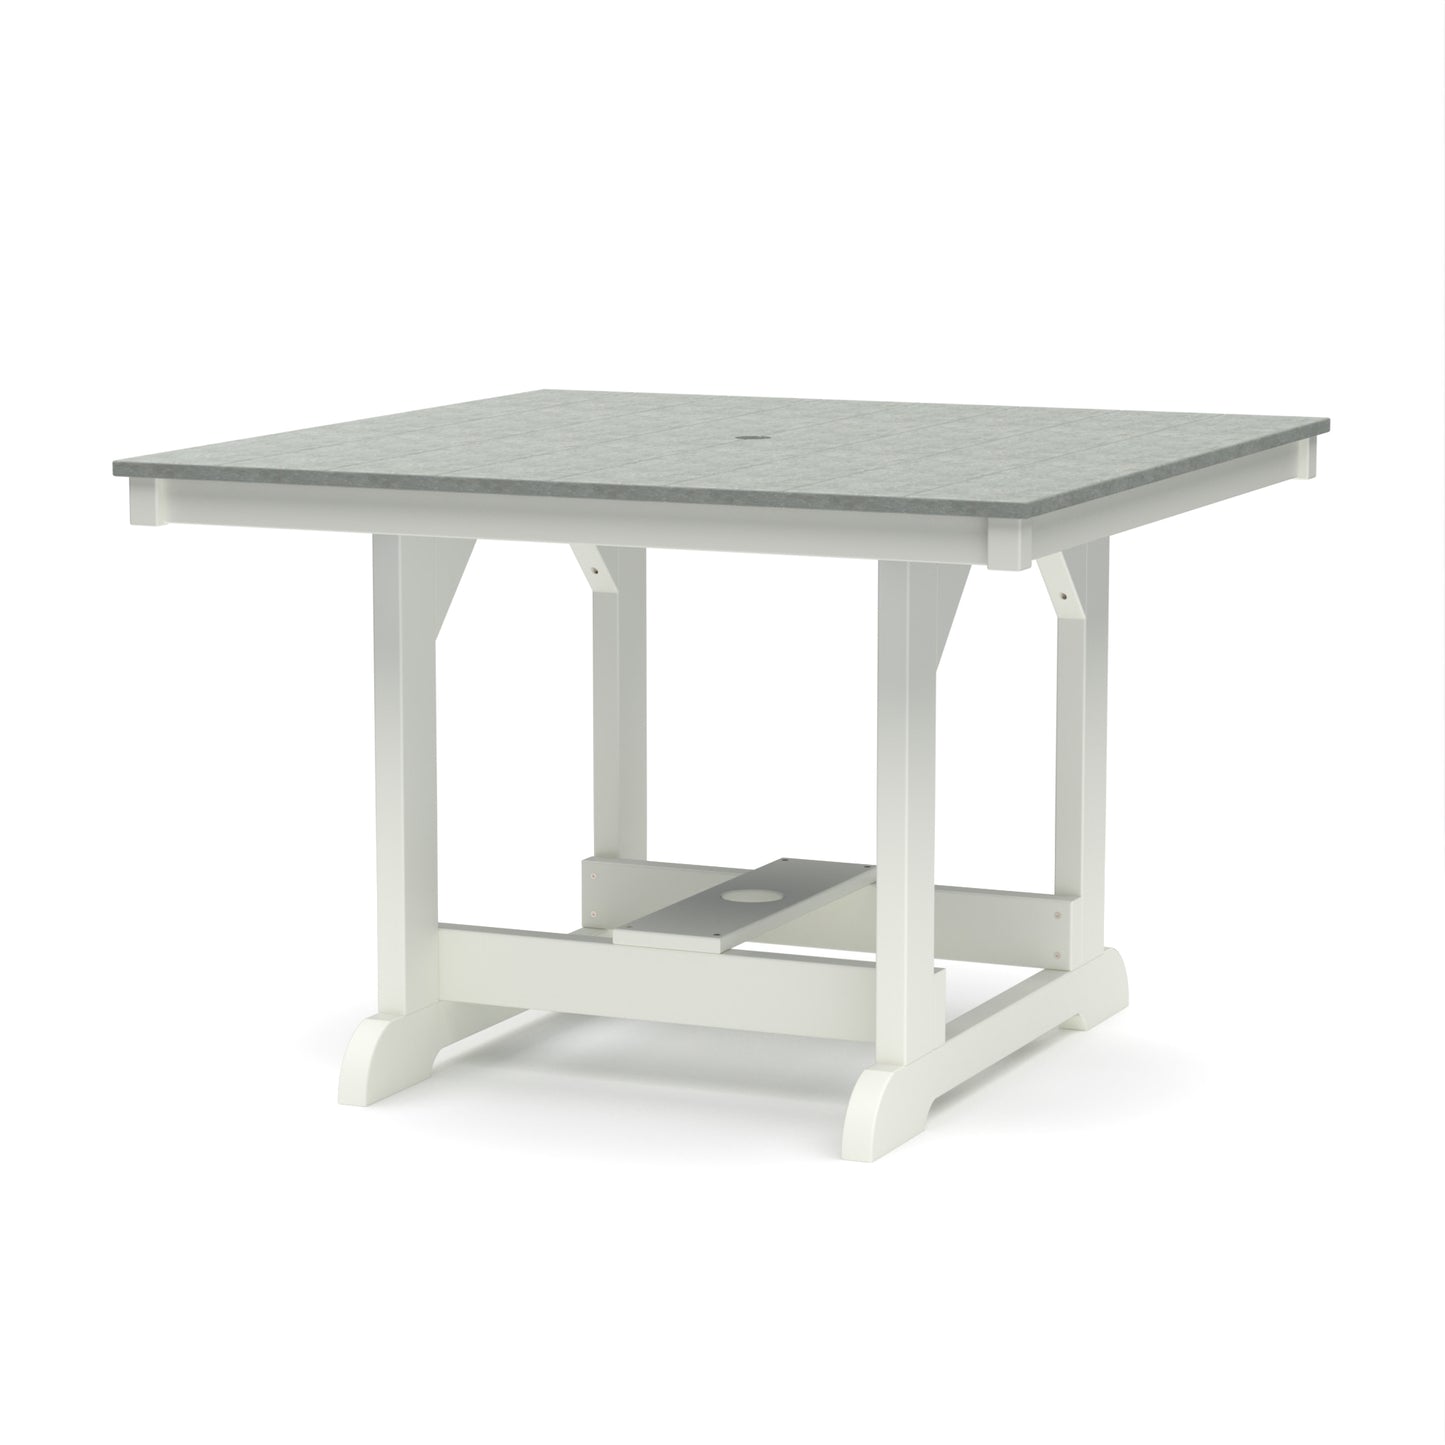 Wildridge Heritage Recycled Plastic Outdoor 44x44 Dining Table - LEAD TIME TO SHIP 4 WEEKS